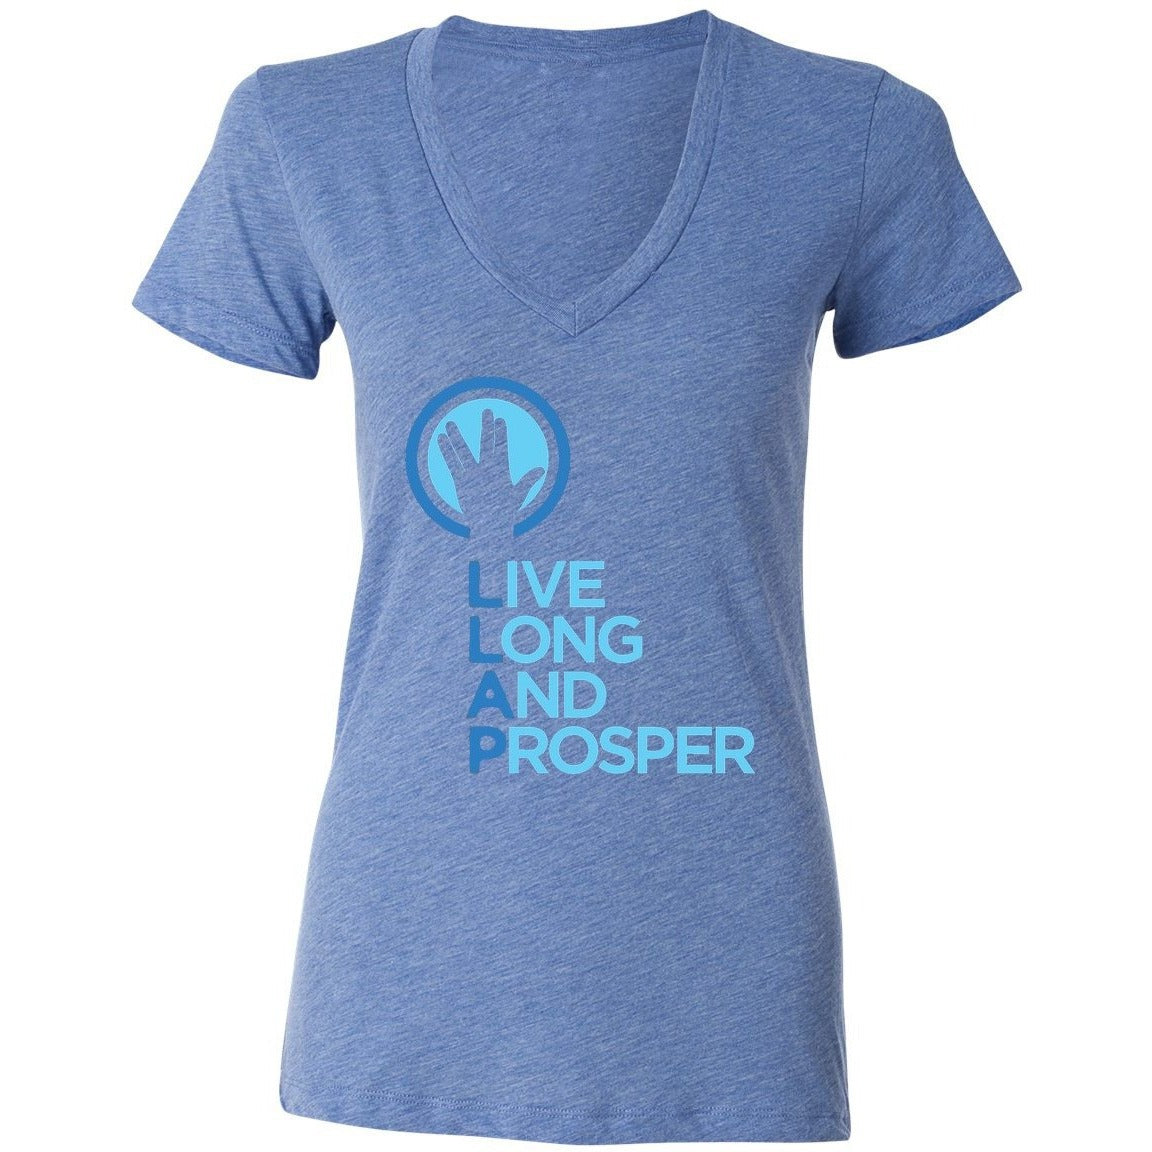 Live Long and Prosper + Hand Salute V Neck Tee - Unisex and Ladies Sizes - Heather Blue - Leonard Nimoy's Shop LLAP